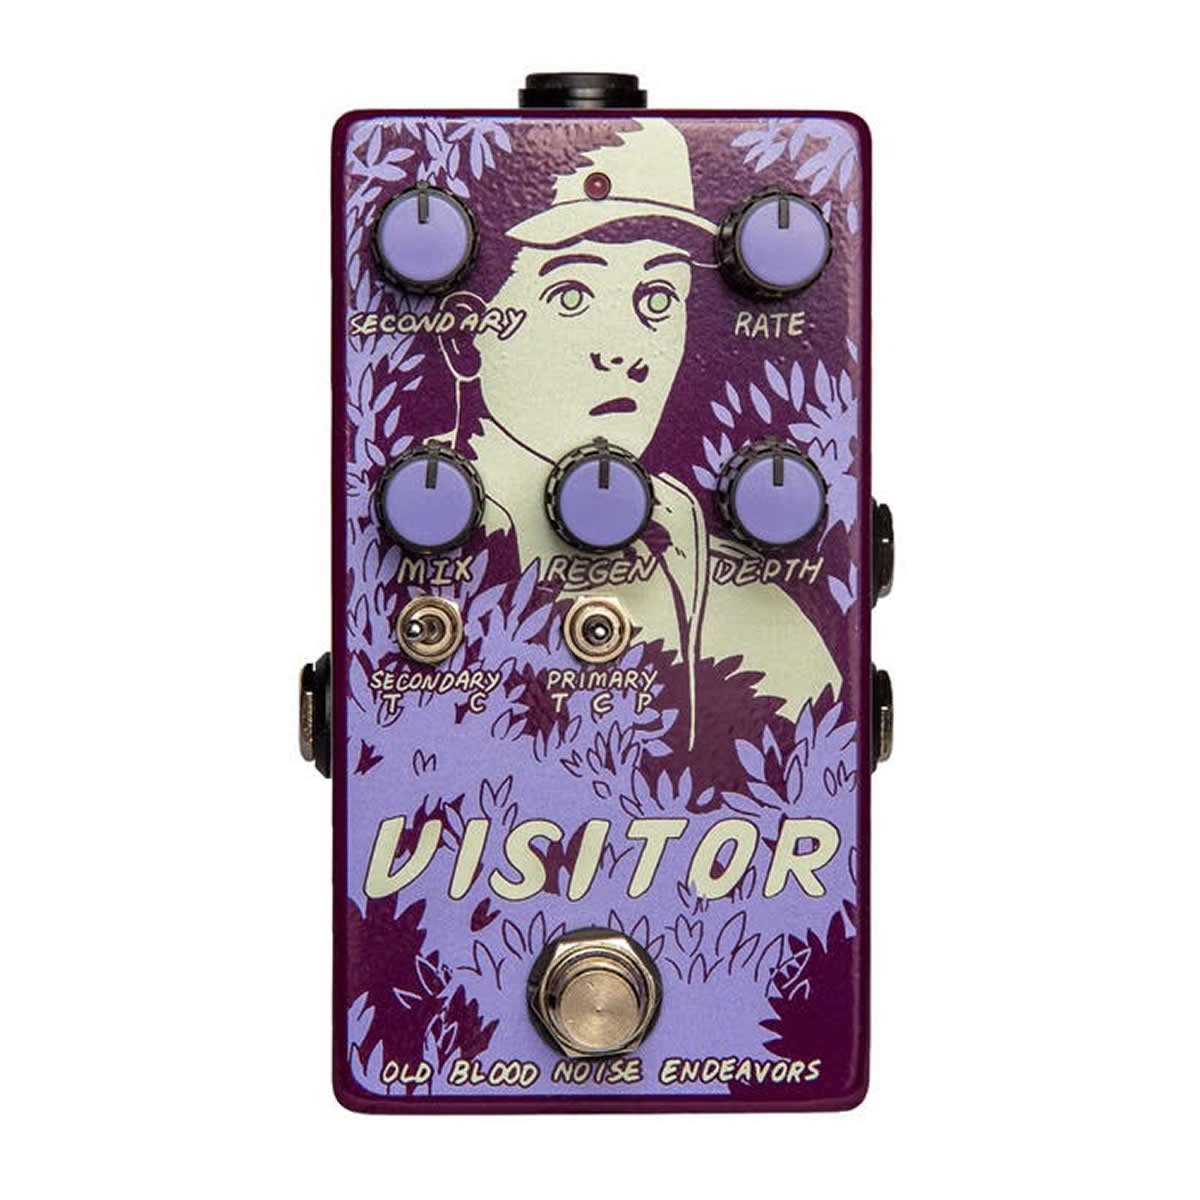 Old Blood Noise Endeavors Visitor Parallel Multi-Modulator Guitar Effects Pedal